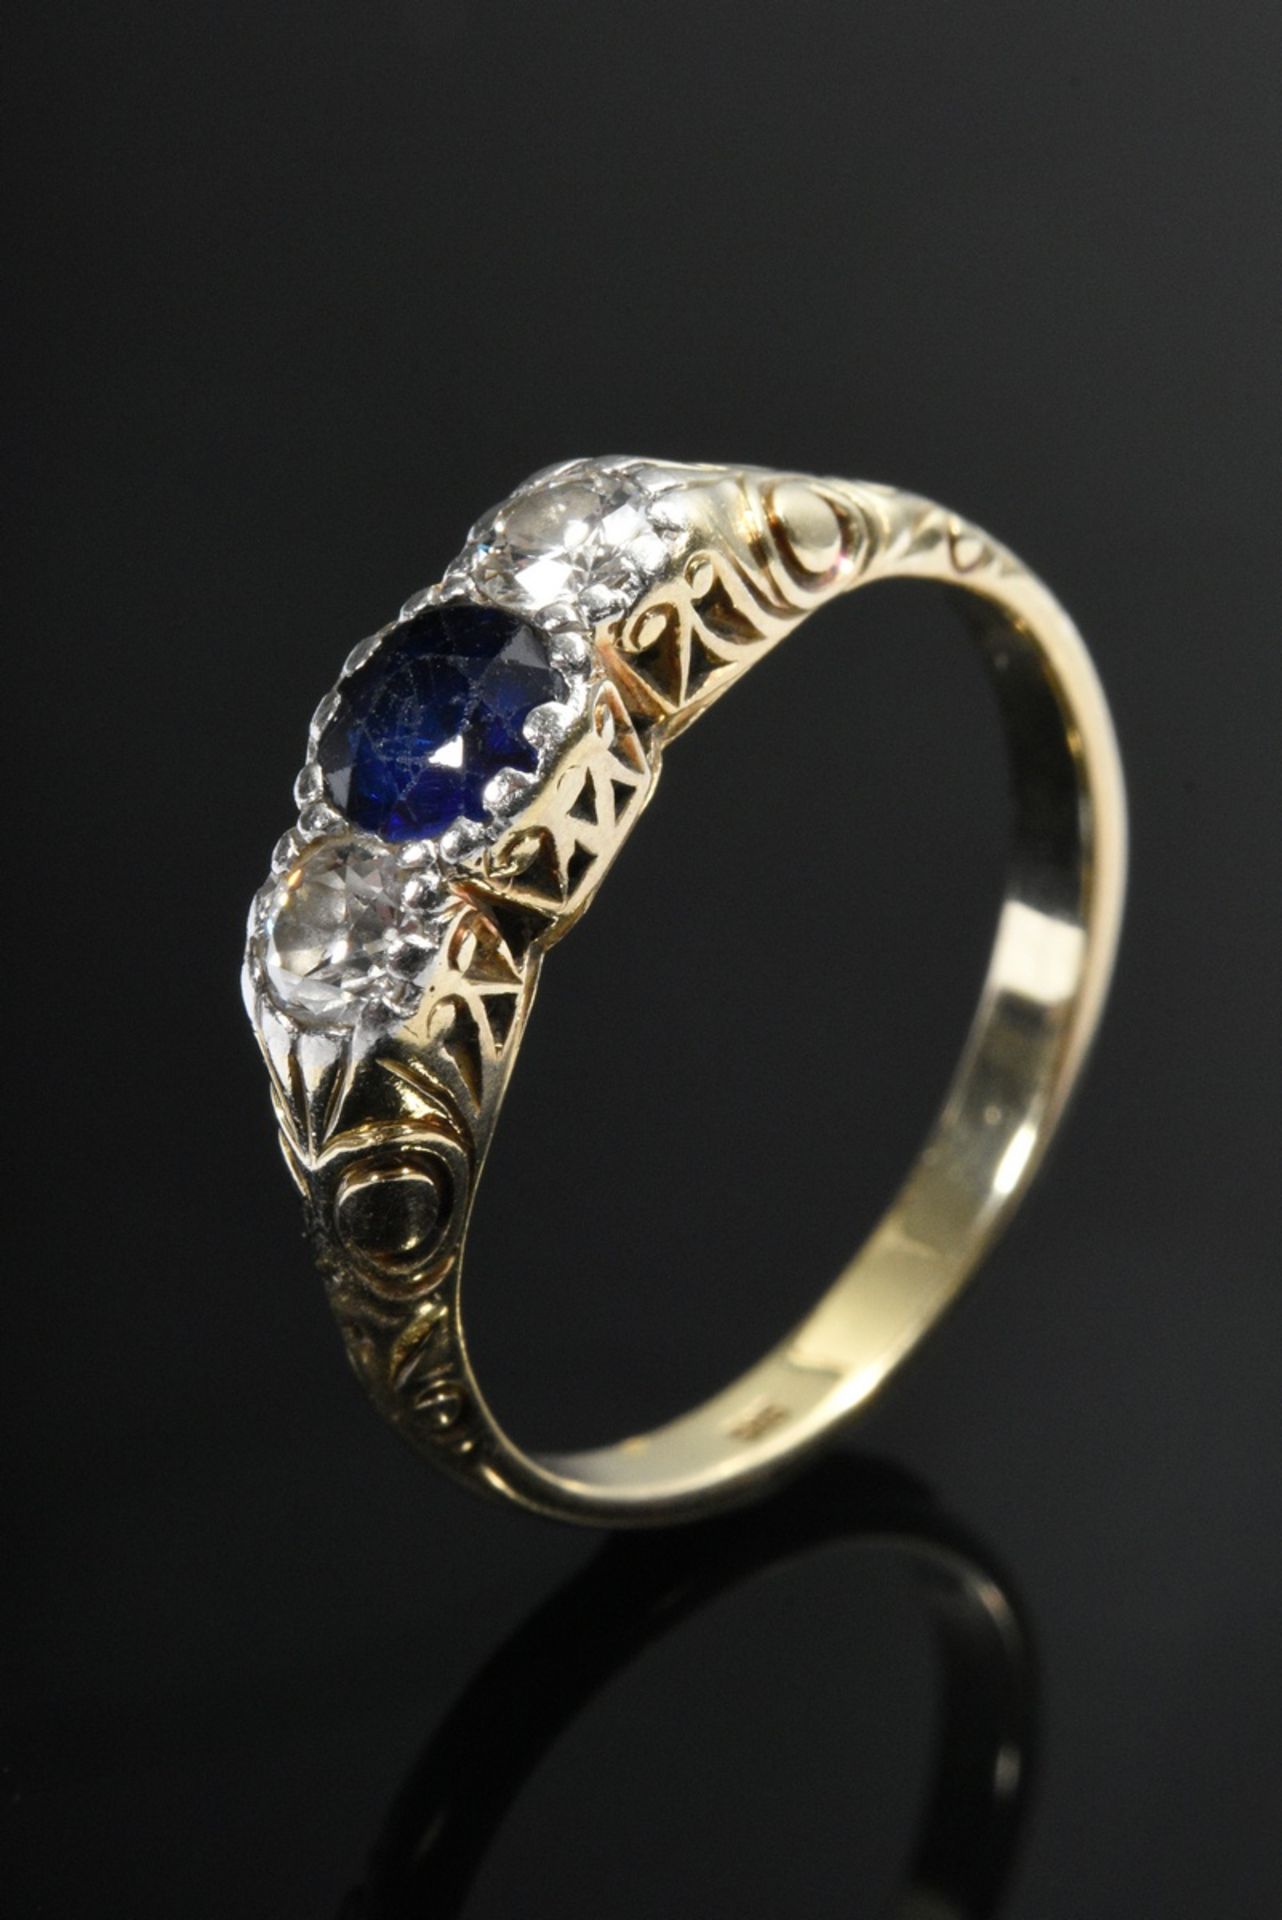 Antique yellow gold 585 pre-stud ring with sapphire and 2 old-cut diamonds (together approx. 0.20ct